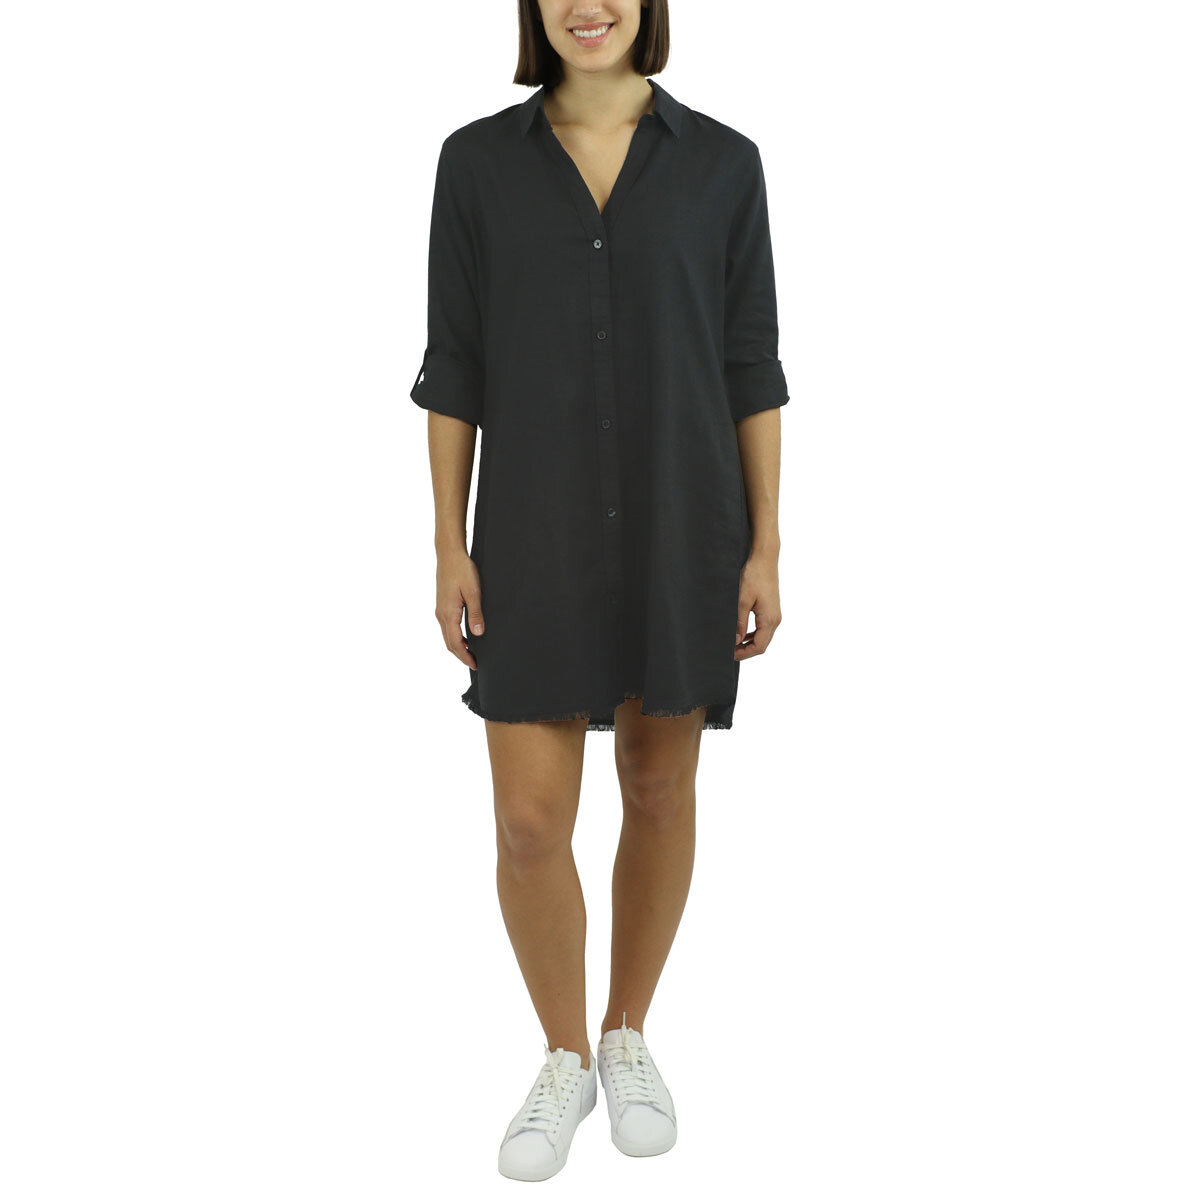 Jachs Ladies Roll Sleeve Linen Blend Dress in 3 Colours & 5 Sizes